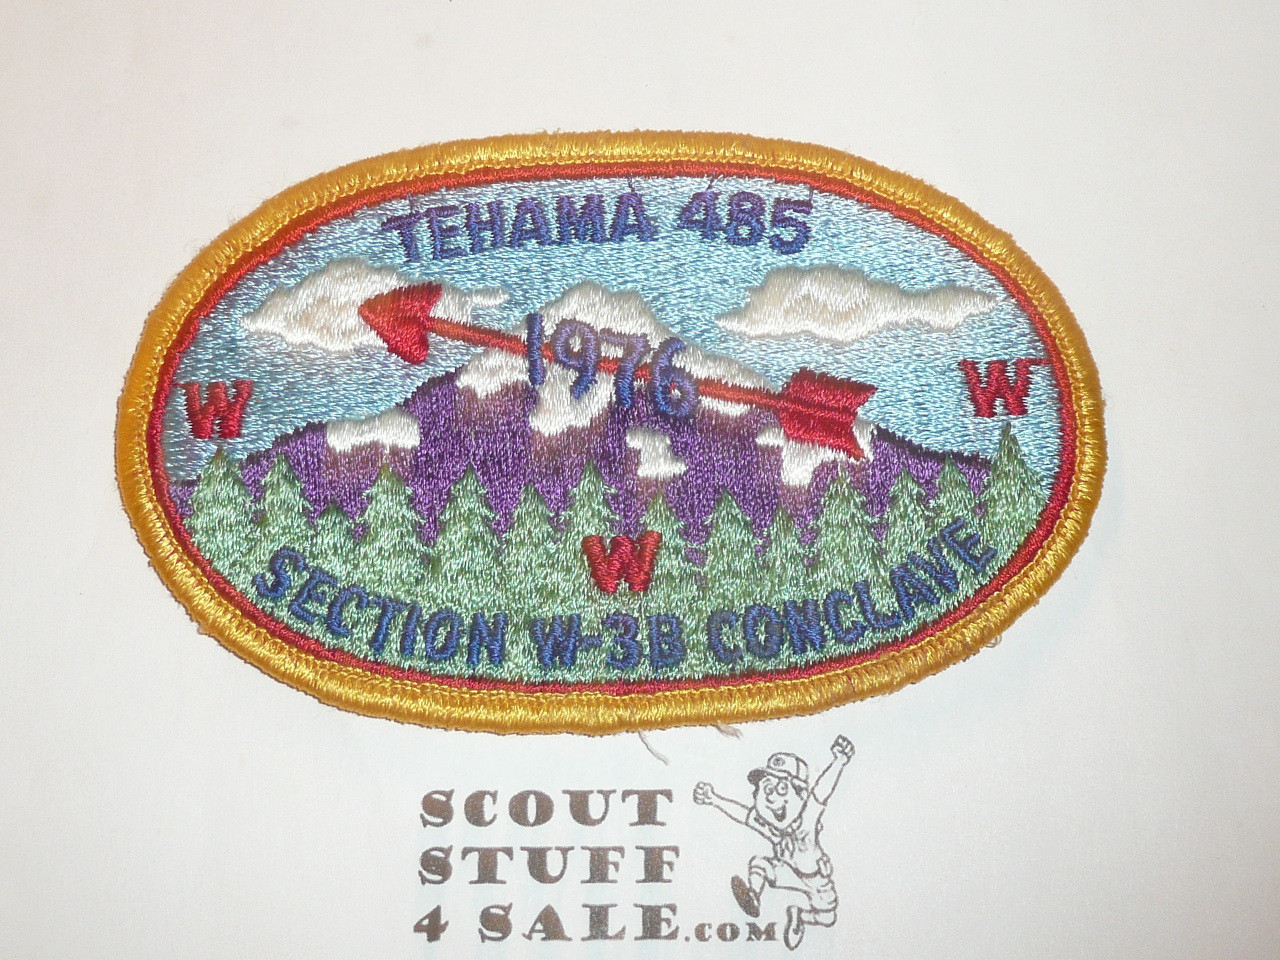 Section W3B 1976 O.A. Conference Patch - Scout